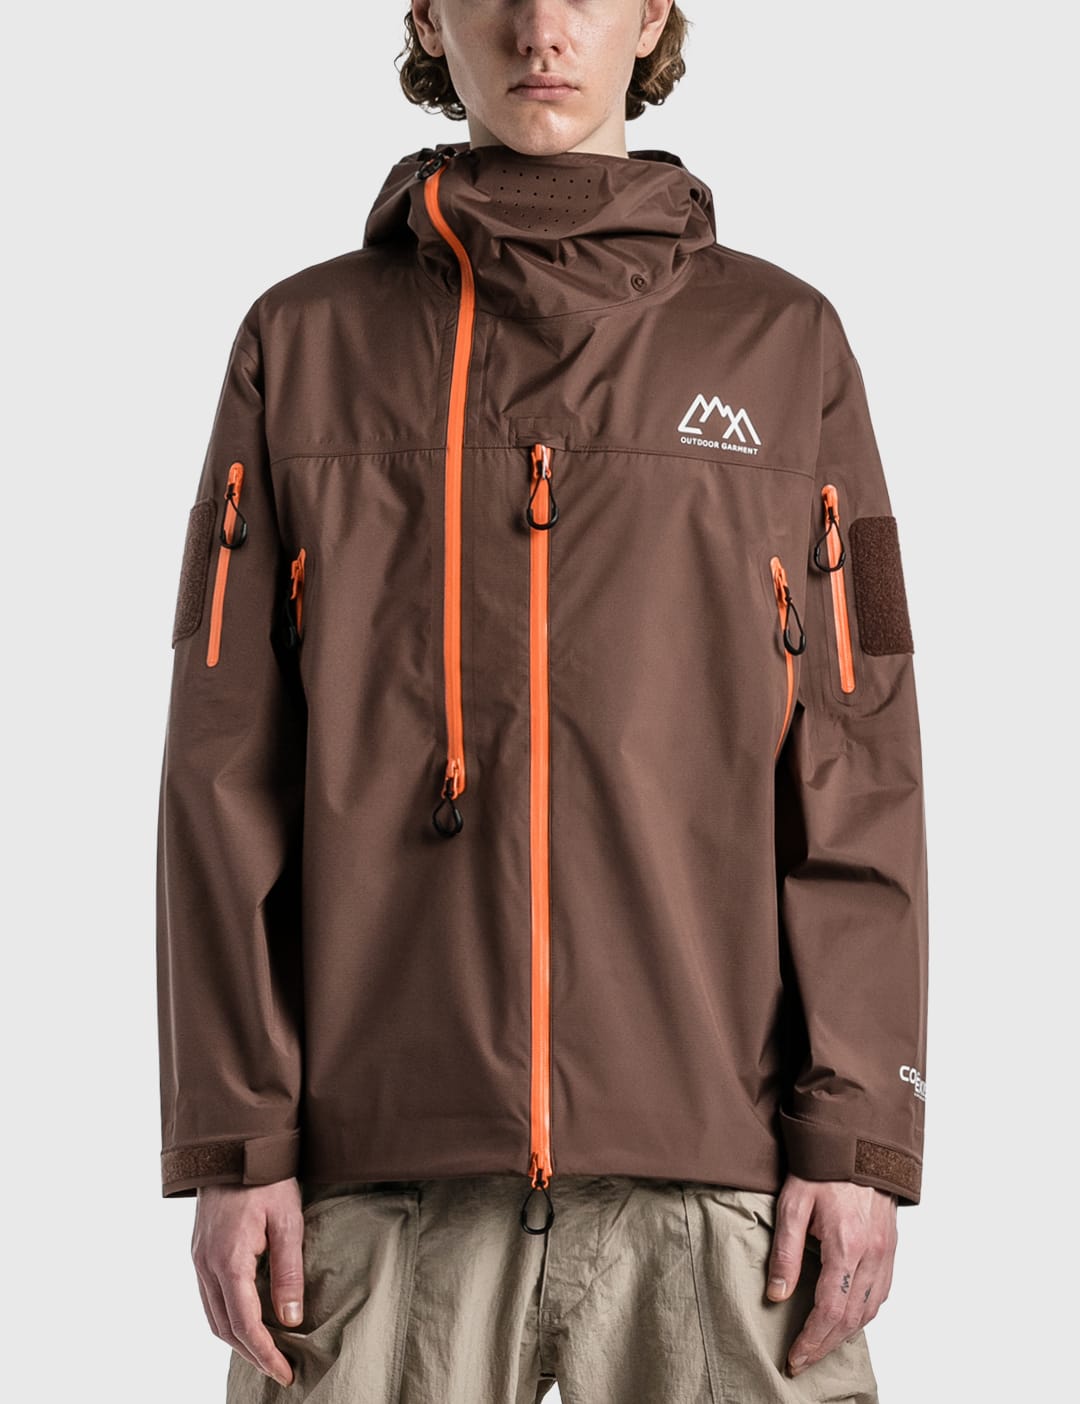 Comfy Outdoor Garment - PULL SHELL COEXIST JACKET | HBX - Globally